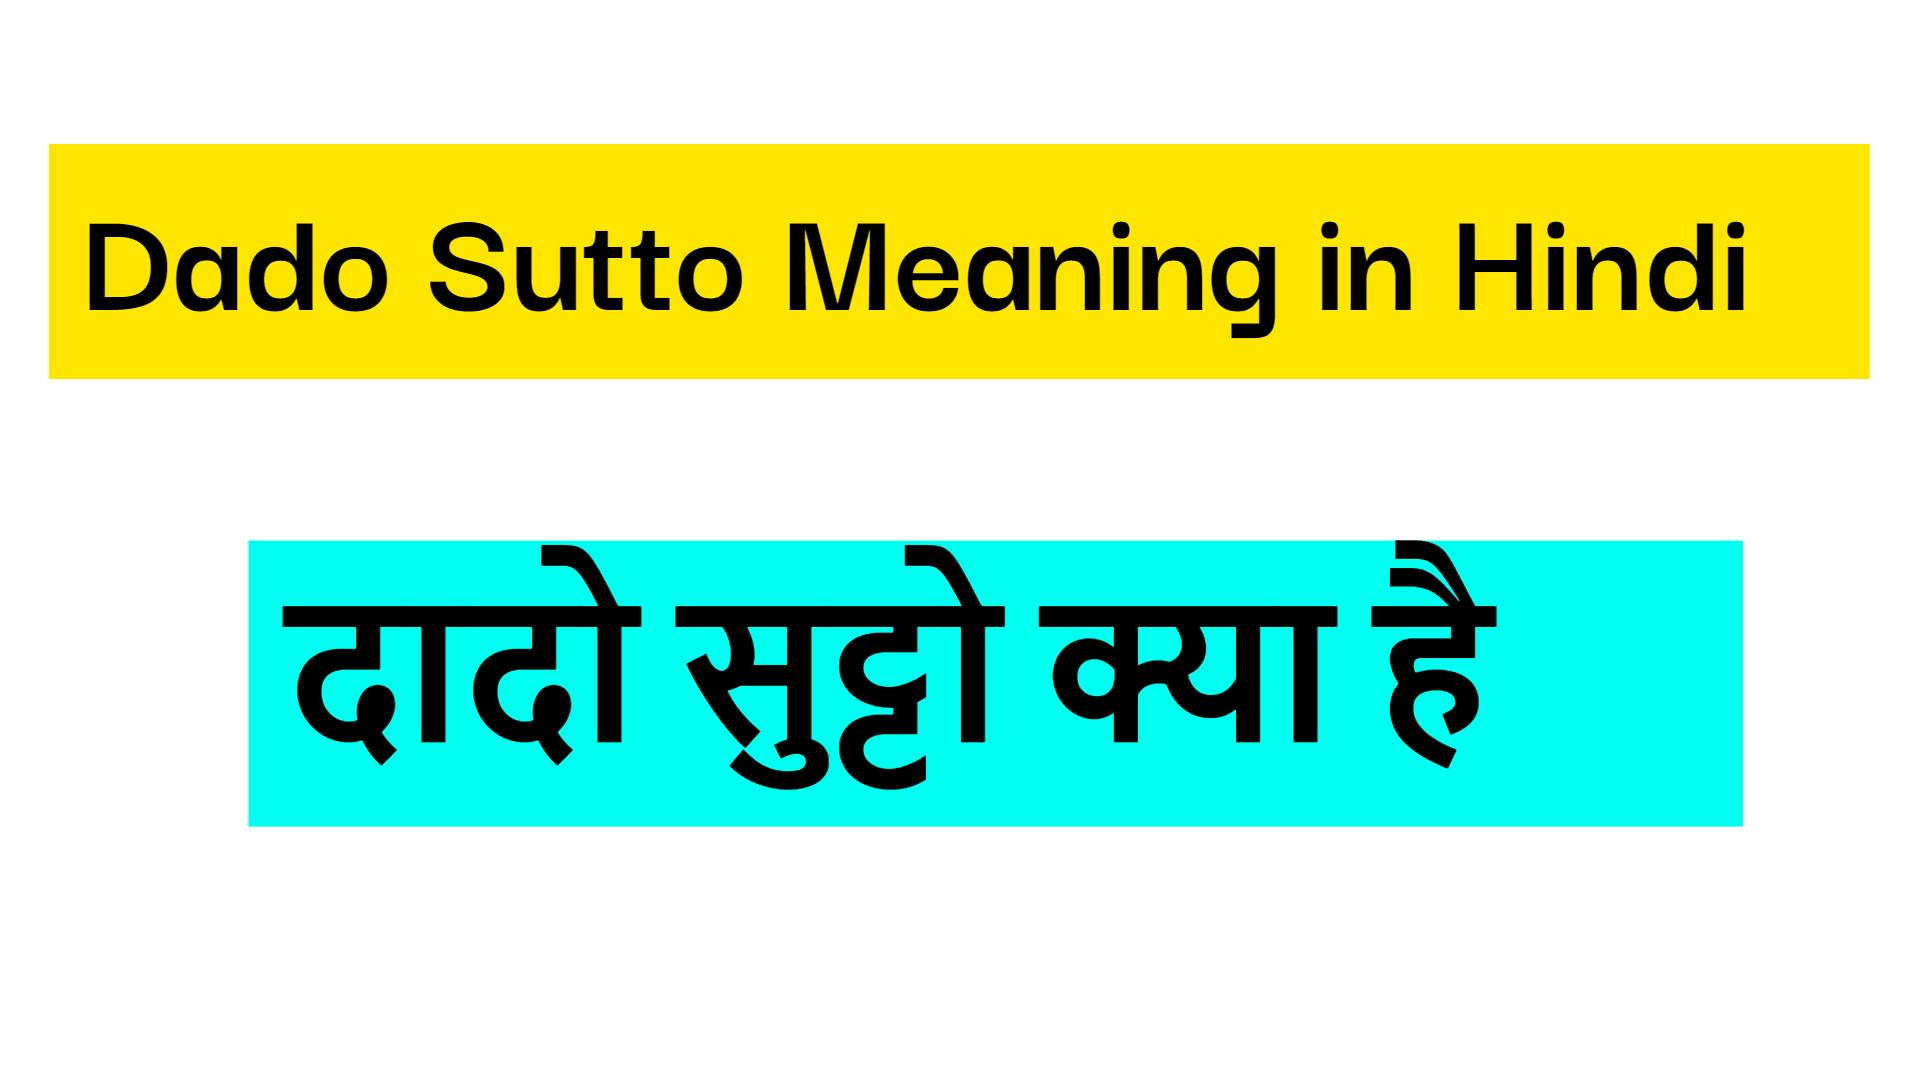 Dado Sutto Meaning in Hindi